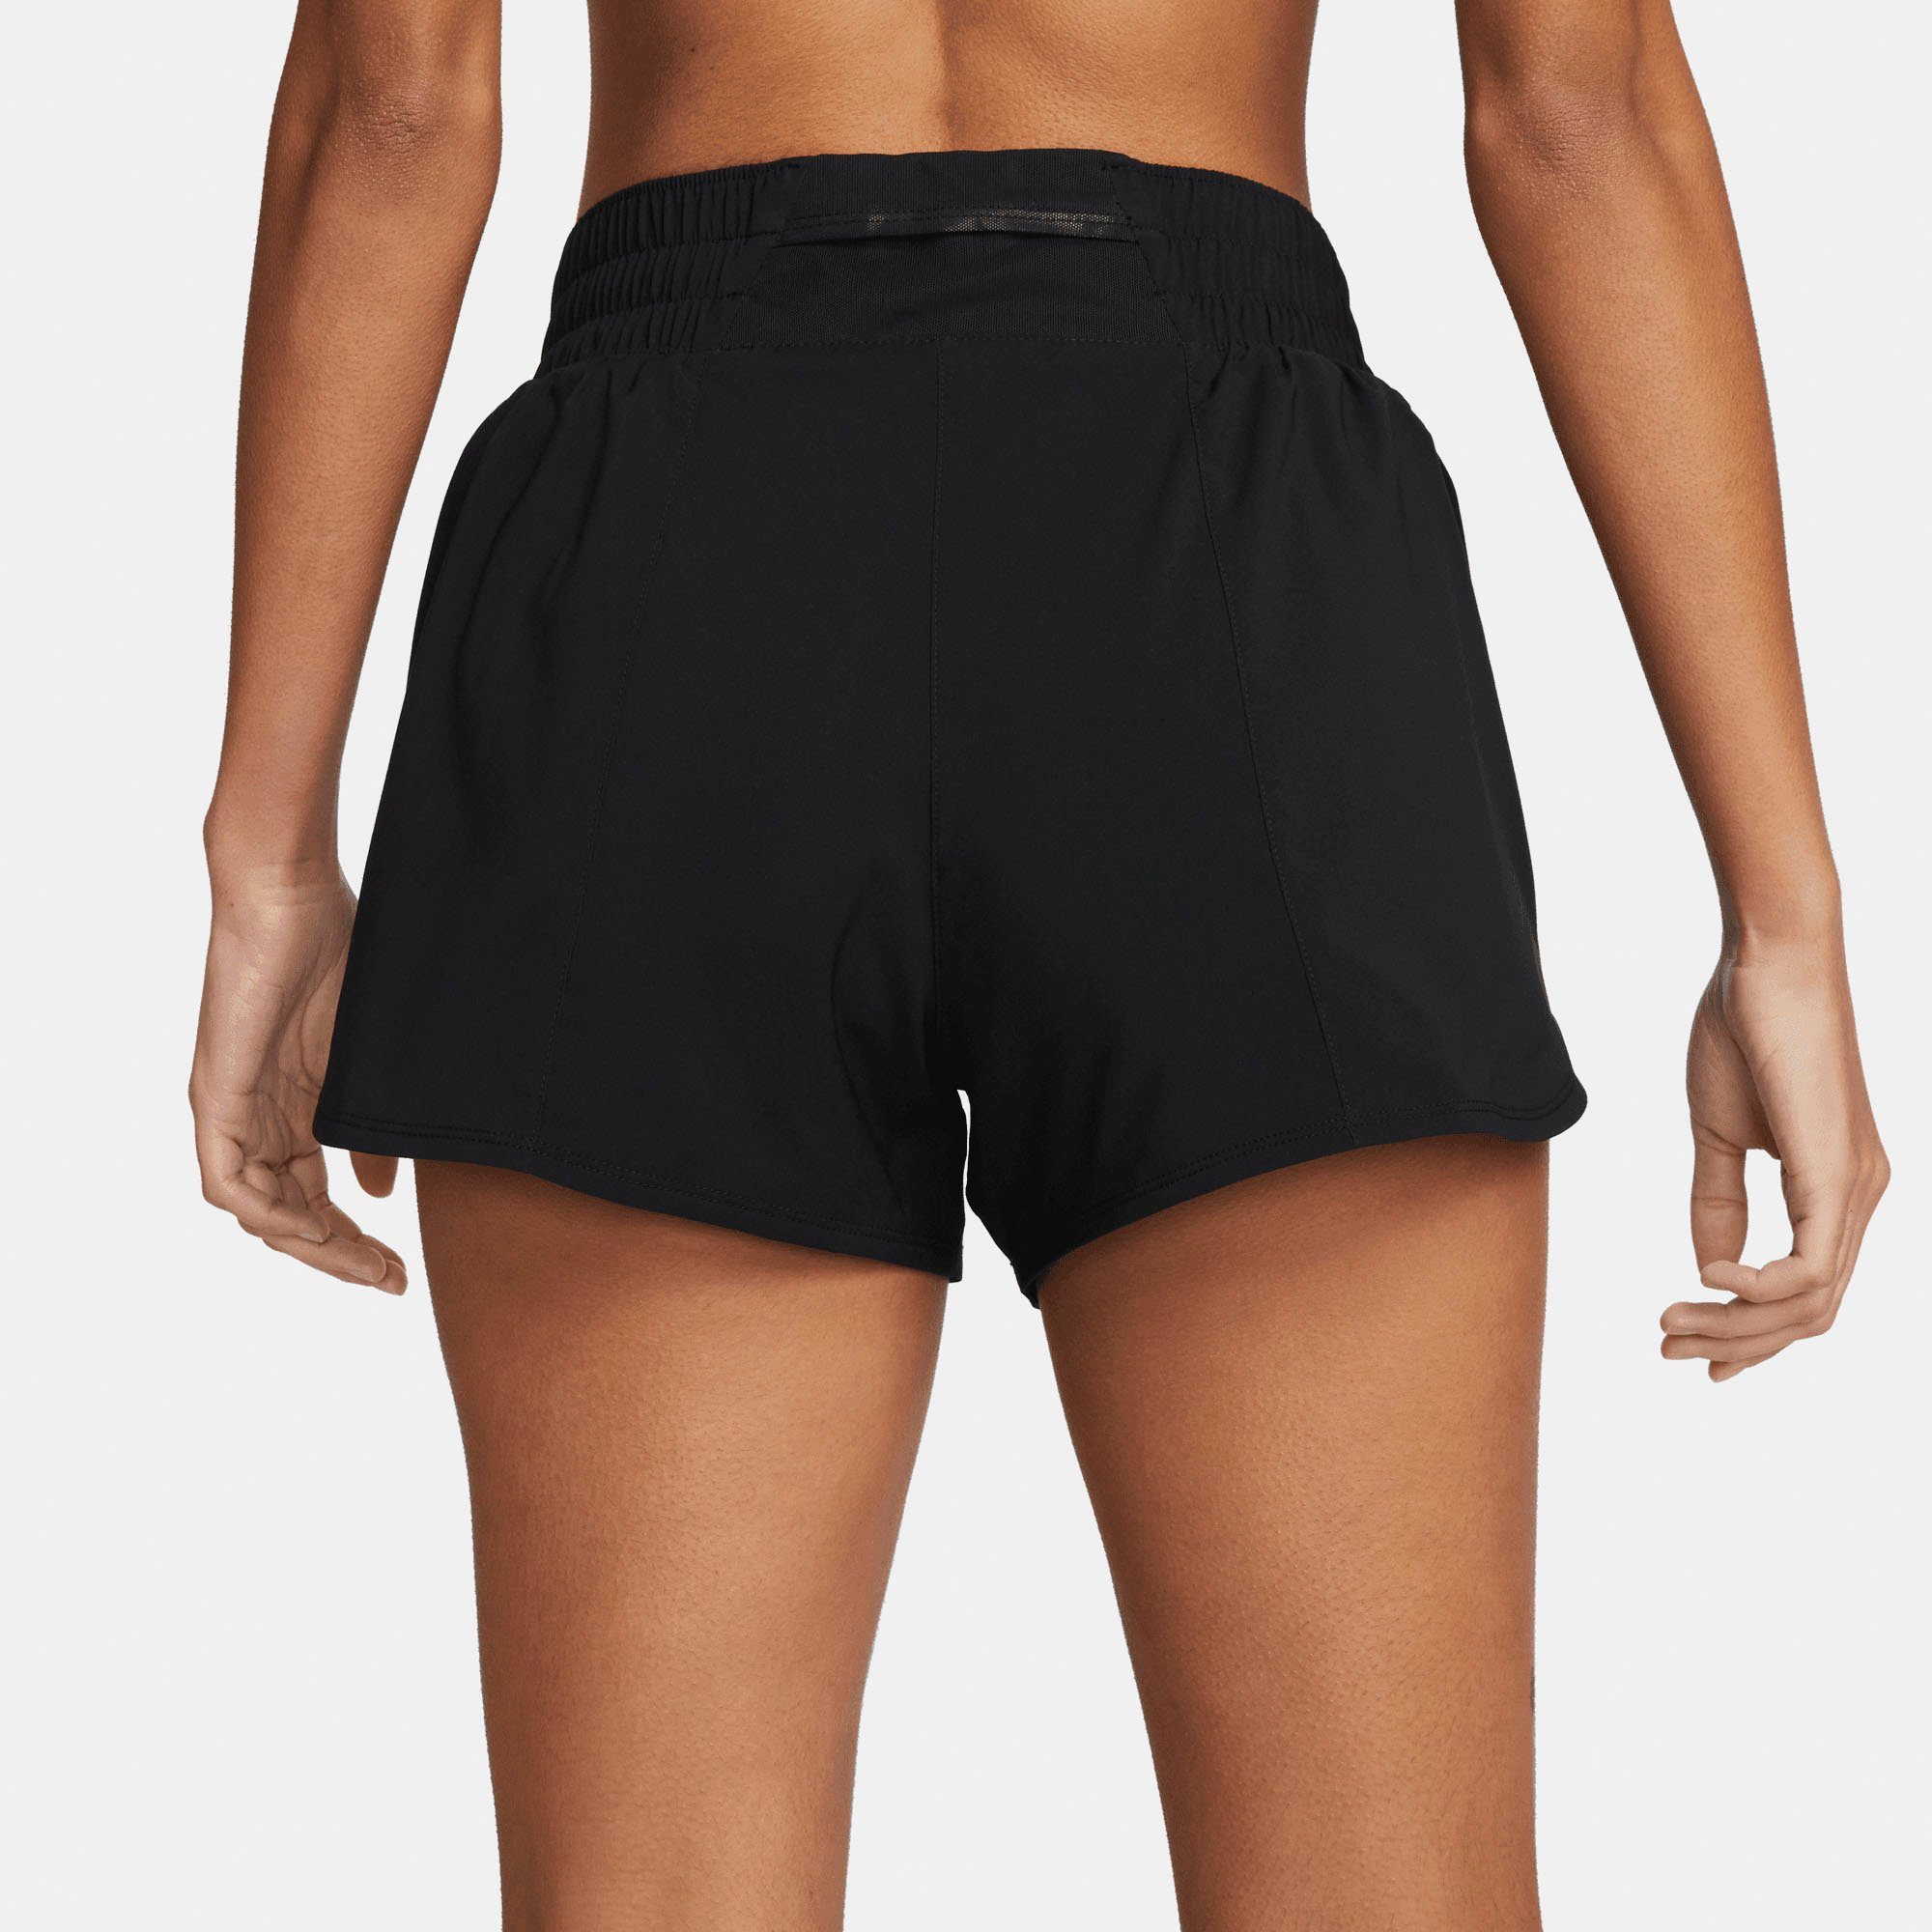 WOMEN'S BLACK/REFLECTIVE SILV ONE MID-RISE SHORTS Trainingsshorts DRI-FIT Nike BRIEF-LINED